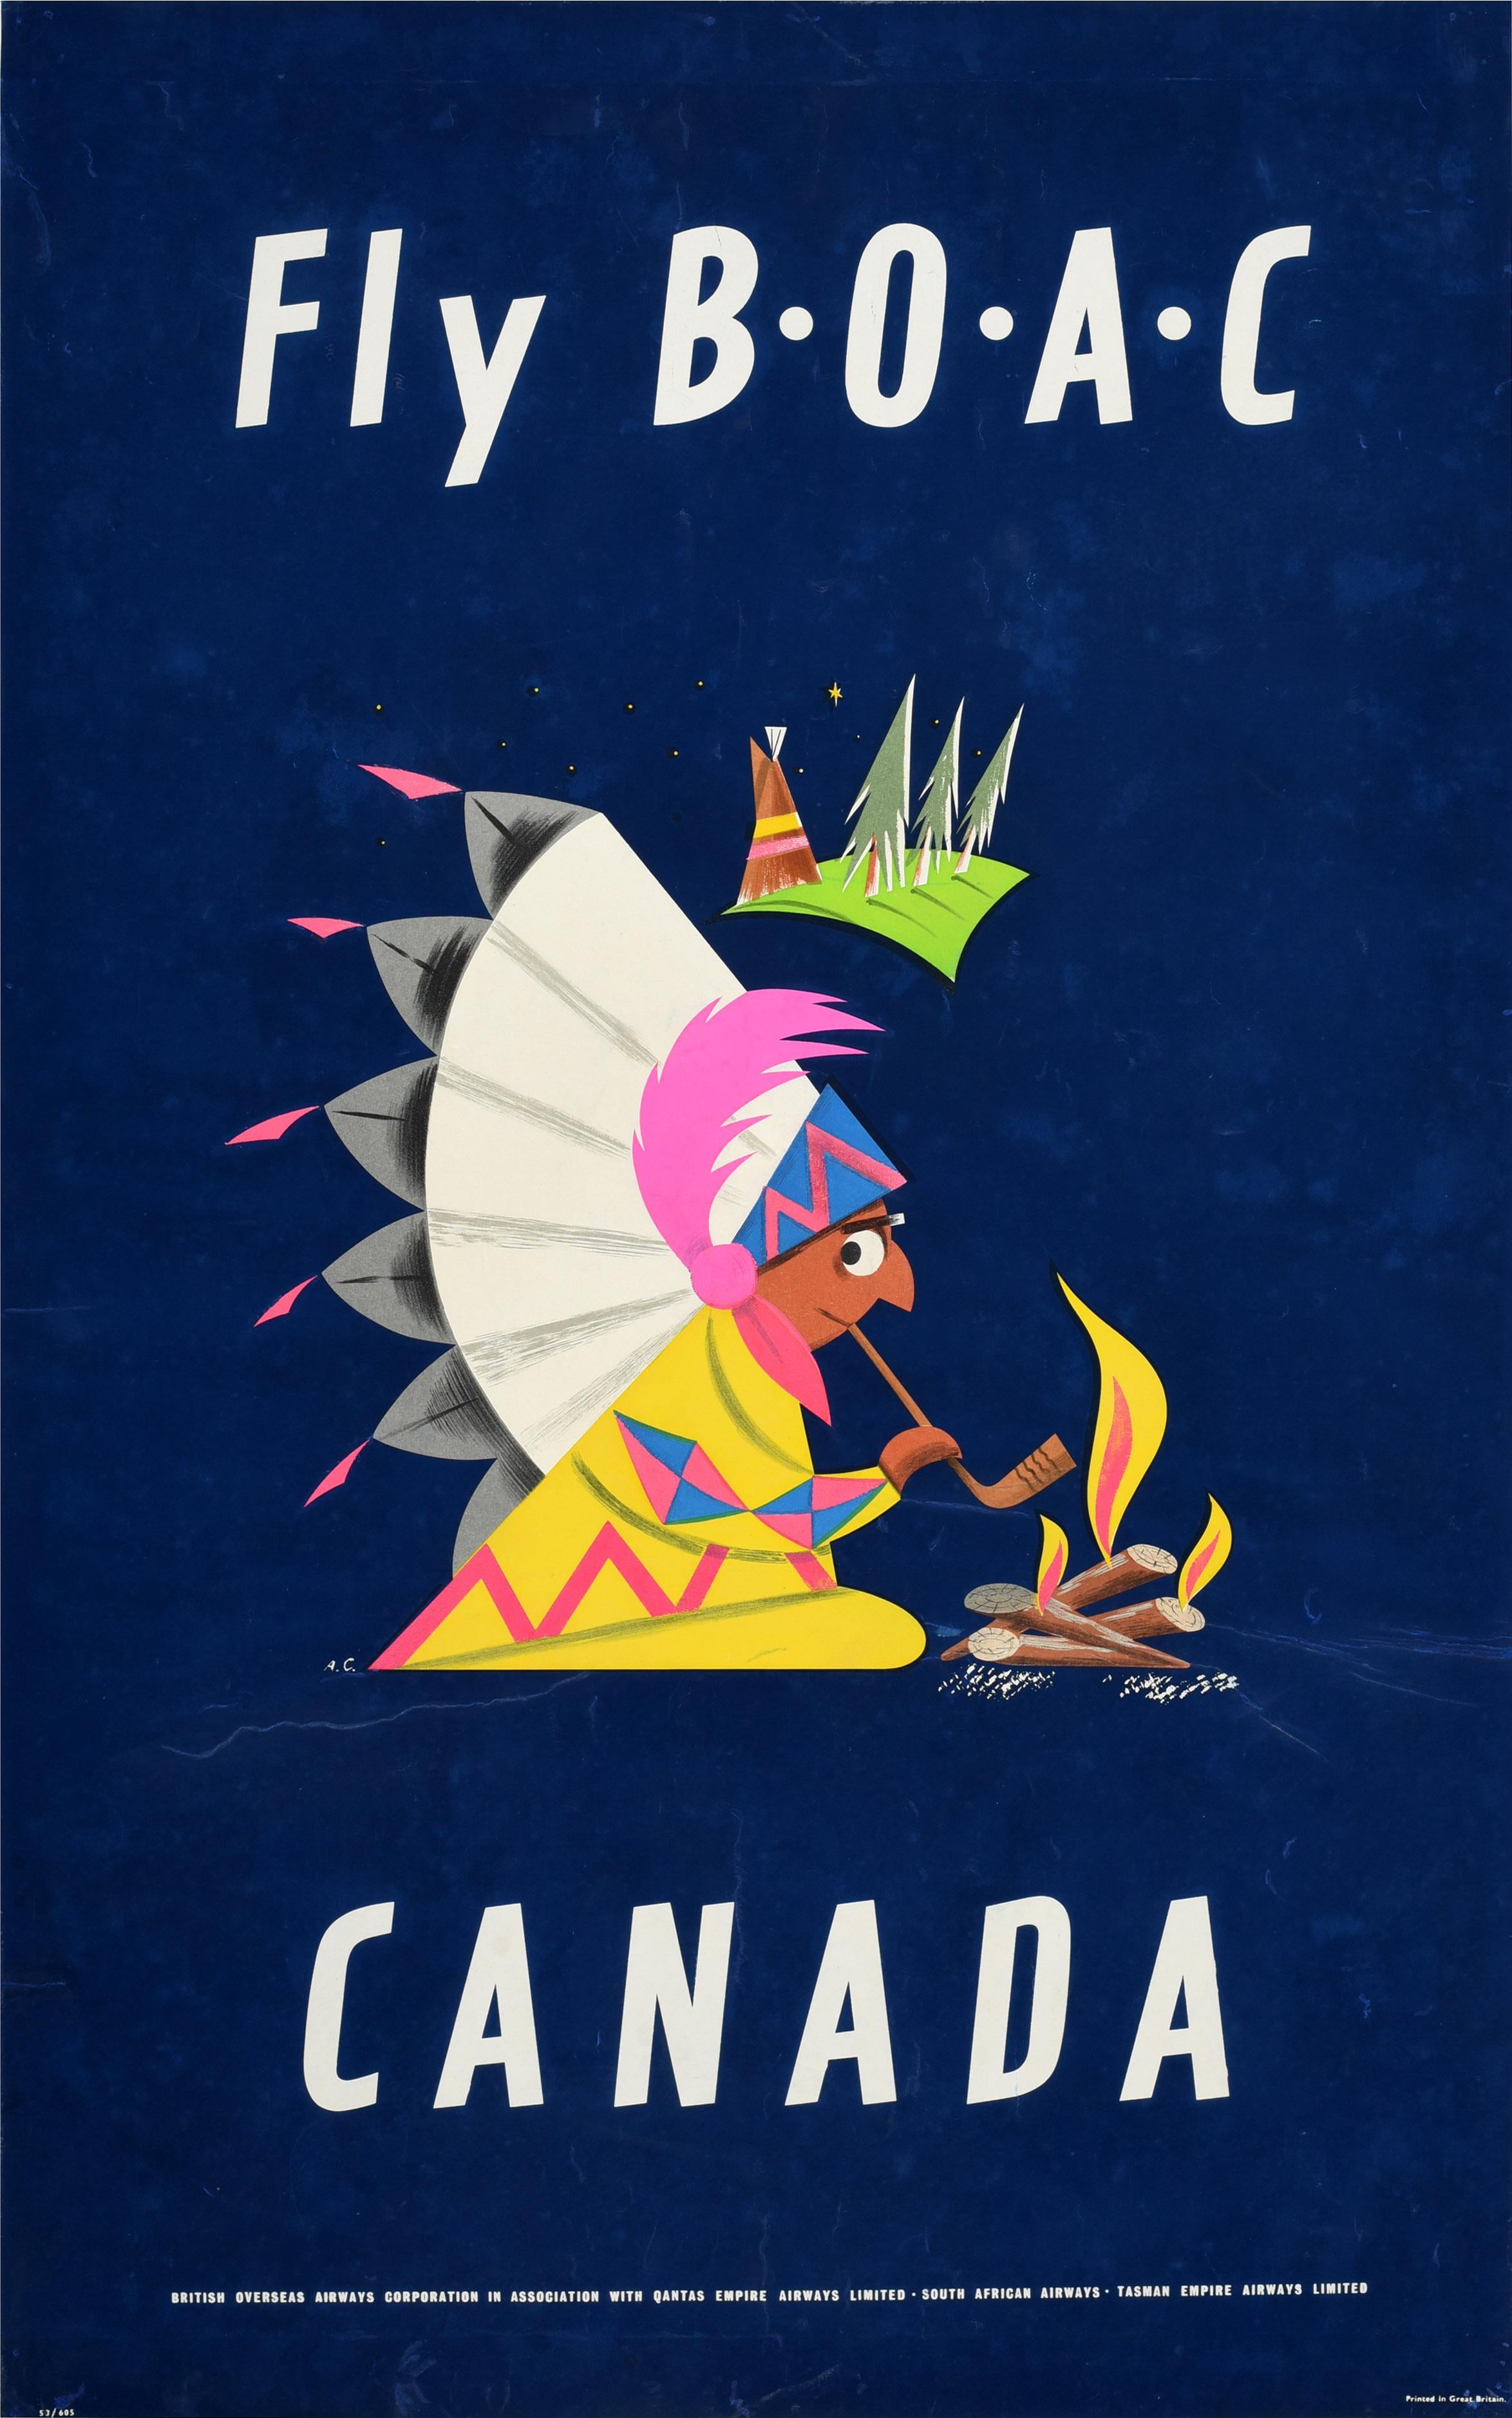 Original vintage silkscreen travel poster for Canada Fly BOAC British Overseas Airways Corporation in Association with Qantas Empire Airways Limited South African Airways Tasman Empire Airways Limited featuring colourful artwork by the Italian